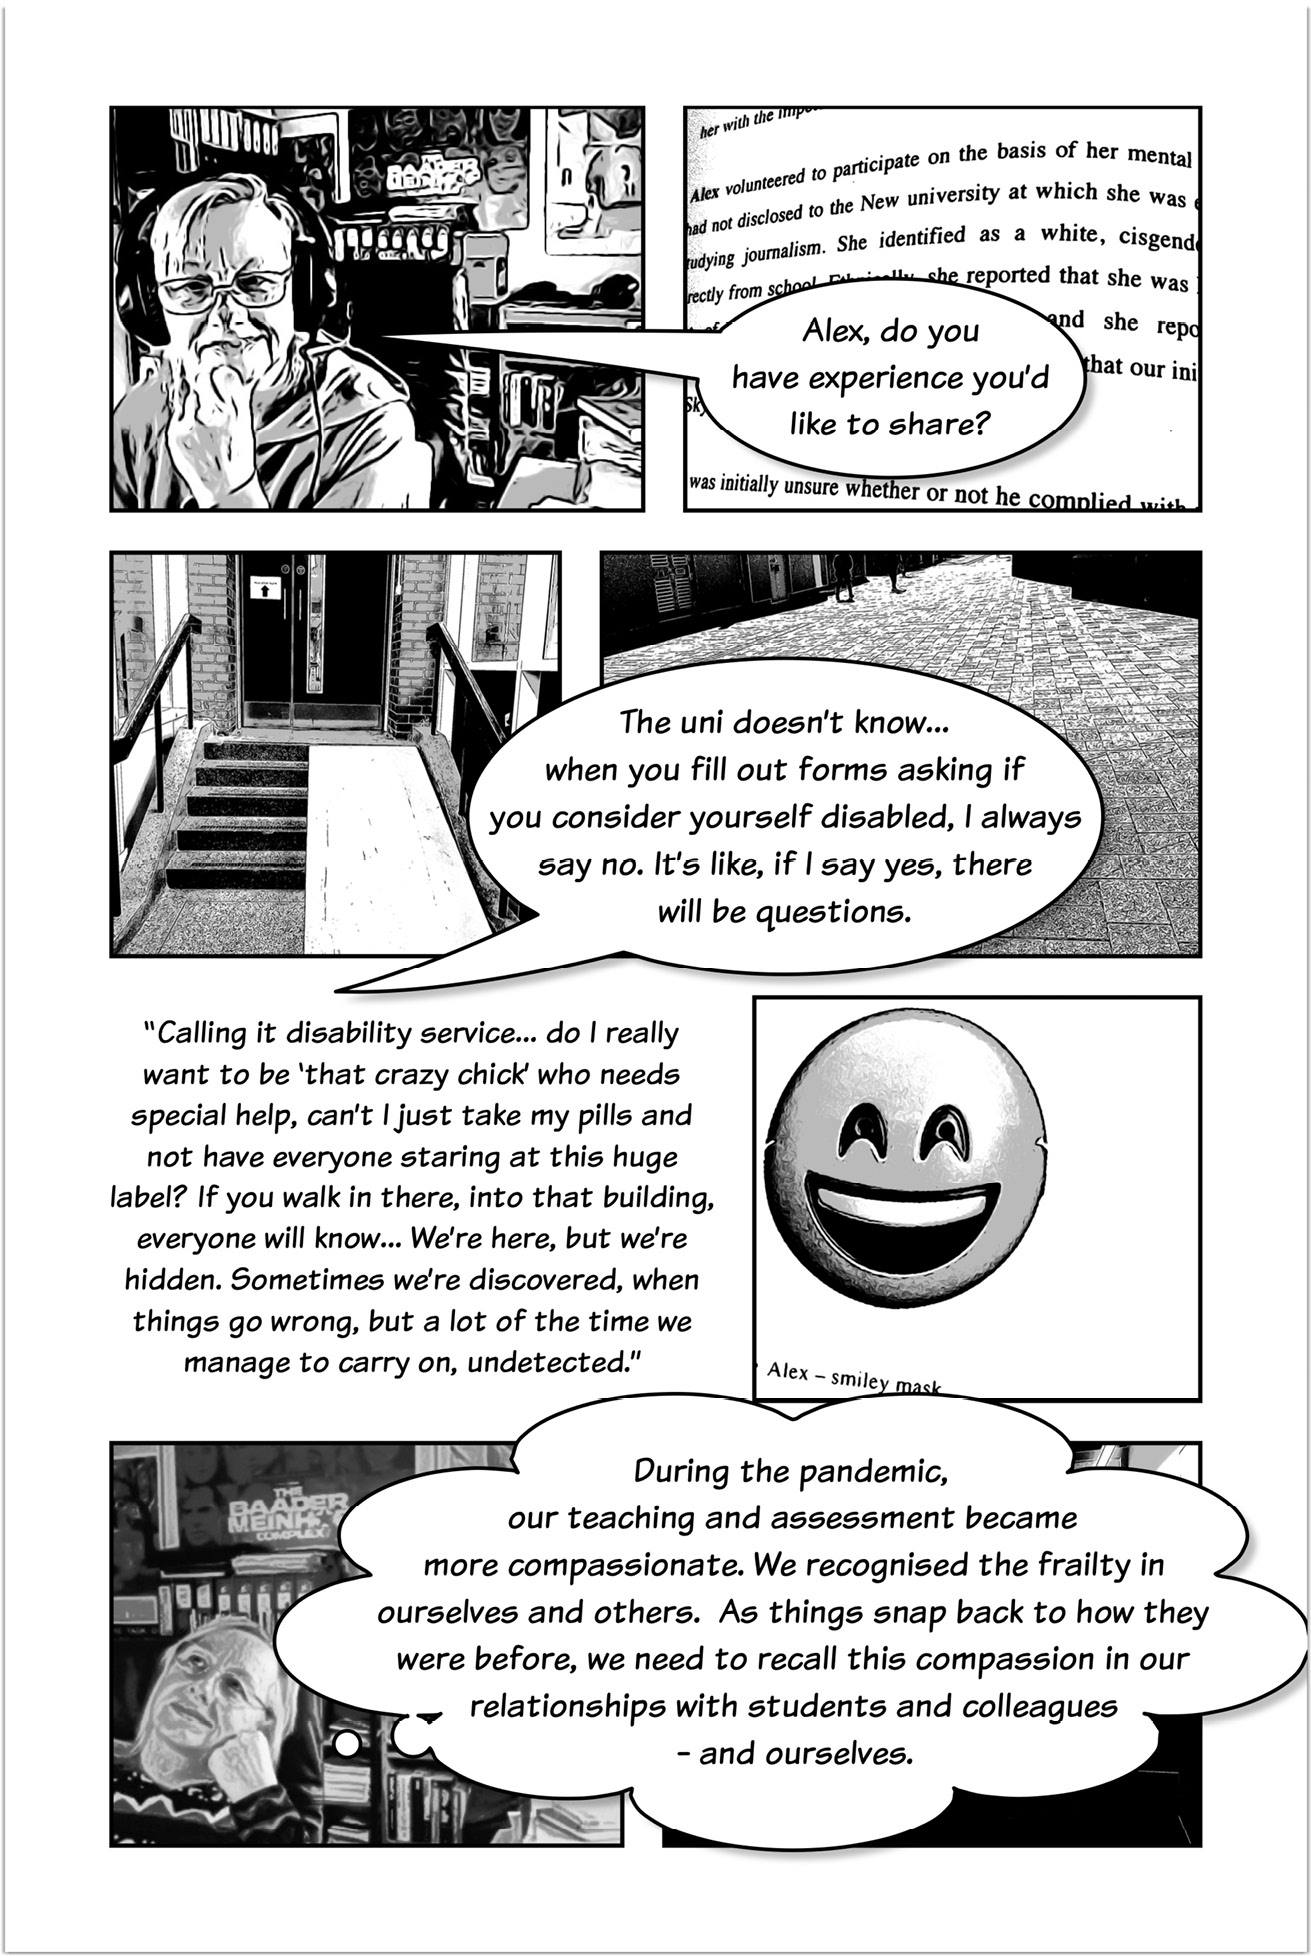 Four-panelled sequence of a comic strip, the first panel showing Trowlerís character with a speech bubble saying:  Alex, do you have experience you’d like to share? The next panel shows a speech bubble that answers: The uni doesn’t know… when you fill out forms asking if you consider yourself disabled, I always say no. It’s like, if I say yes, there will be questions. Another three-panelled sequence introduced by text that reads: “Calling it disability service… do I really want to be ‘that crazy chick’ who needs special help, can’t I just take my pills and not have everyone staring at this huge label? If you walk in there, Into that building everyone will know… We’re here, but we’re hidden. Sometimes we’re discovered, when things go wrong, but a lot of the time we manage to carry on, undetected.” The next panel displays a smiley emoji with text that reads: Alex - smiley maskThe following panel shows Trowlerís character with a thought bubble that reads:  During the pandemic, our teaching and assessment became more compassionate. We recognised the frailty in ourselves and others. As things snap back to how they were before, we need to recall this compassion in our relationships with students and colleagues — and ourselves.